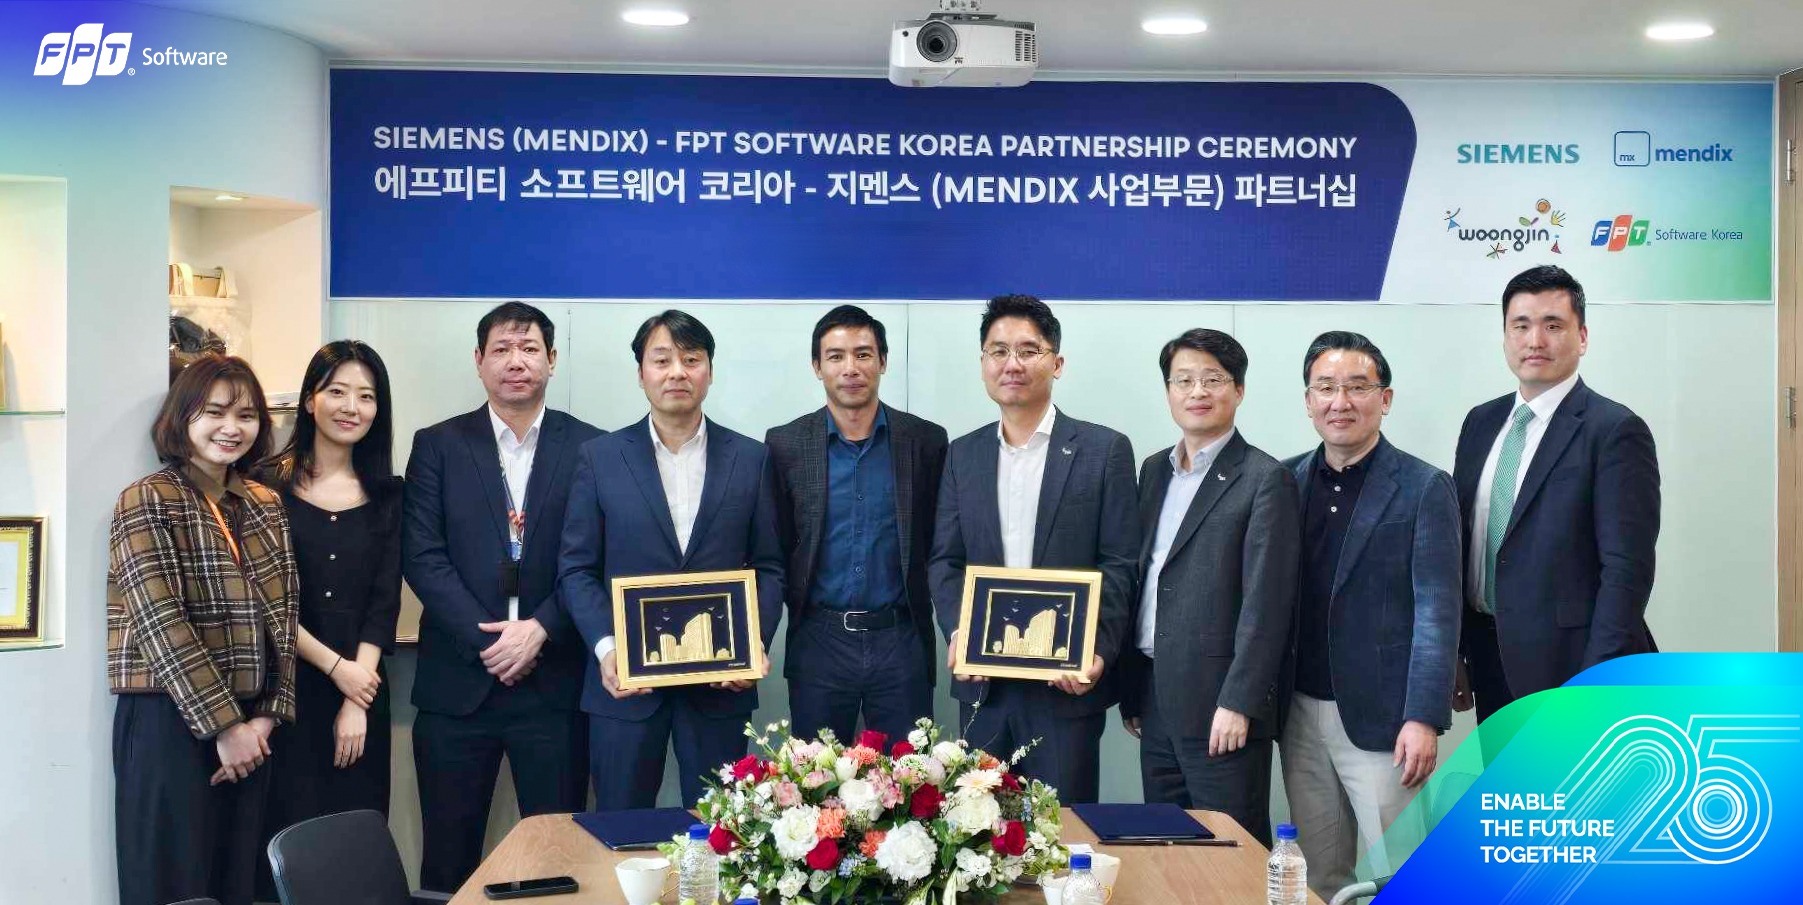 FPT Software Partners with Siemens to Provide Low-code Platform Mendix in Korean and Japanese Markets